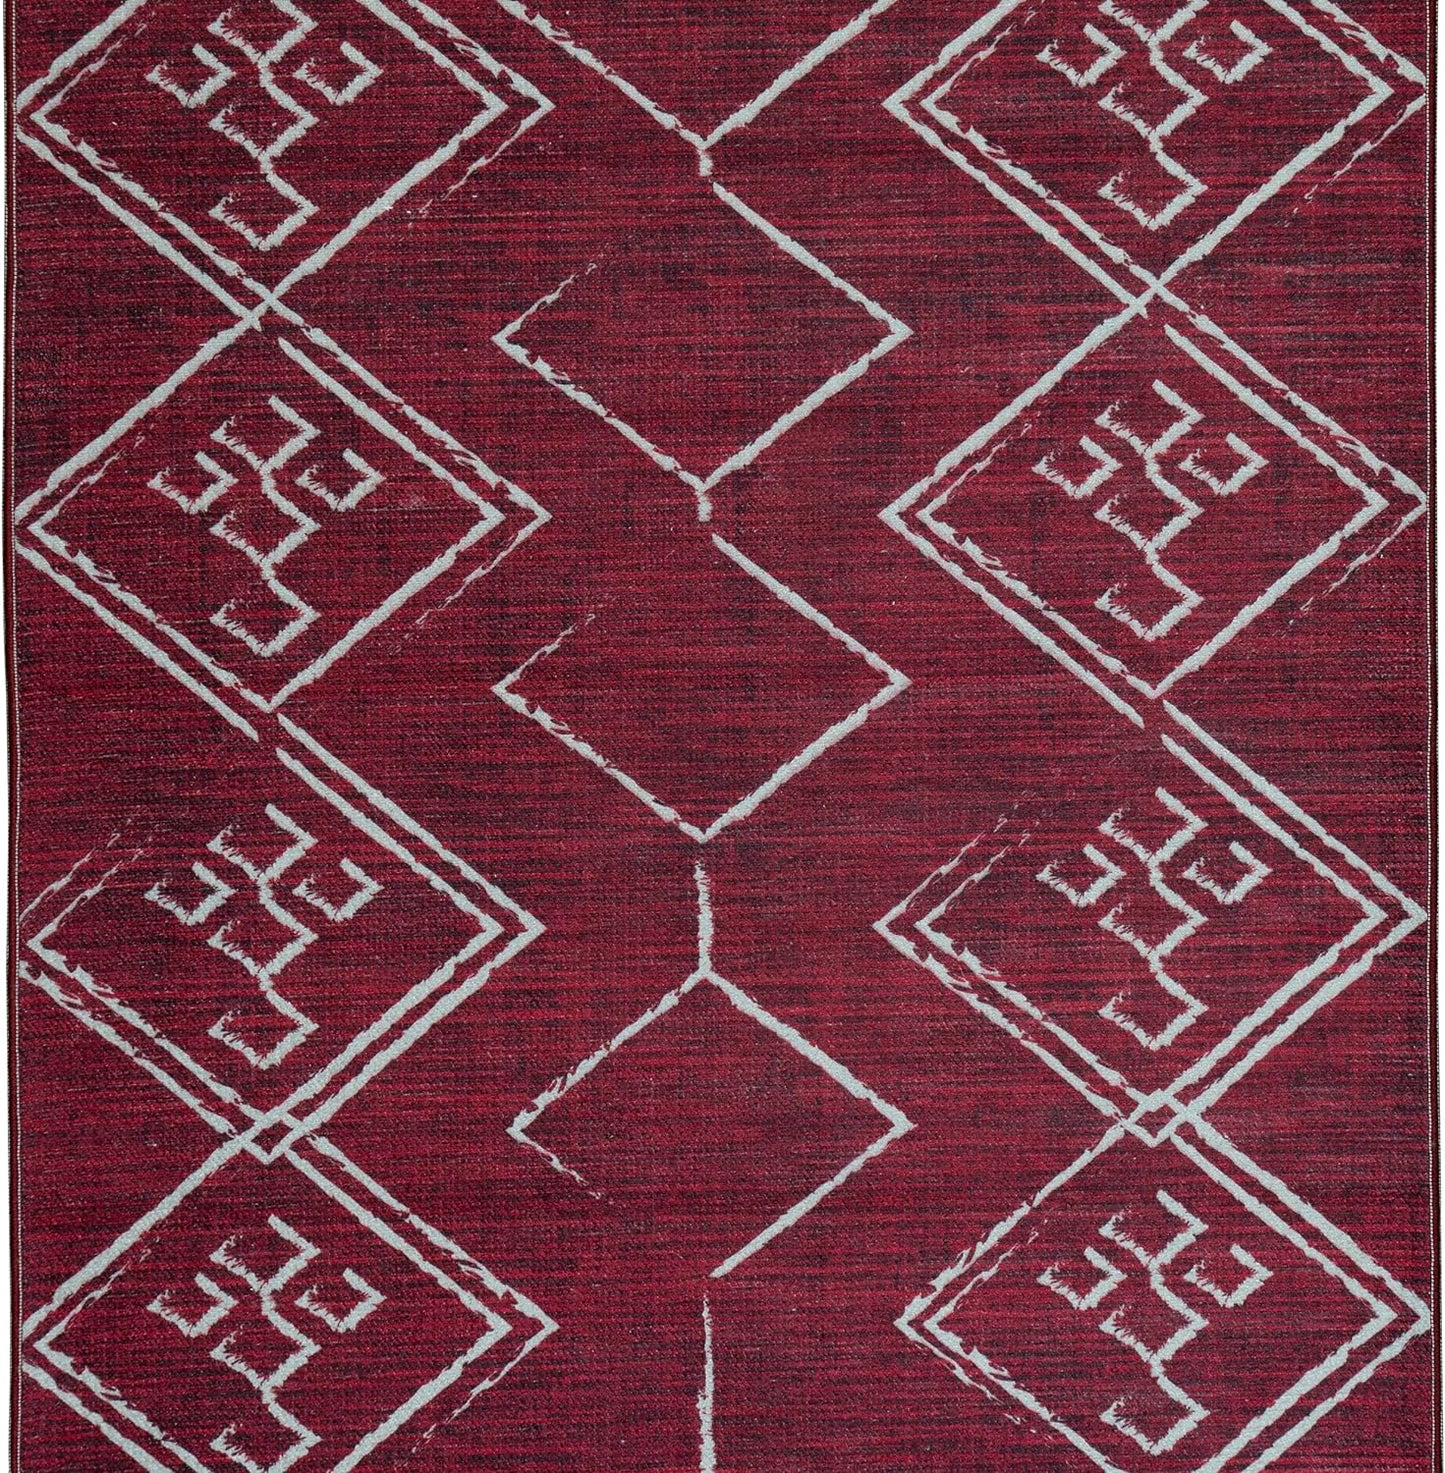 Playa Rug Machine Washable Area Rug With Non Slip Backing - Stain Resistant - Eco Friendly - Family and Pet Friendly - Aspen Tribal Moroccan Bohemian Burgundy&Creme Design